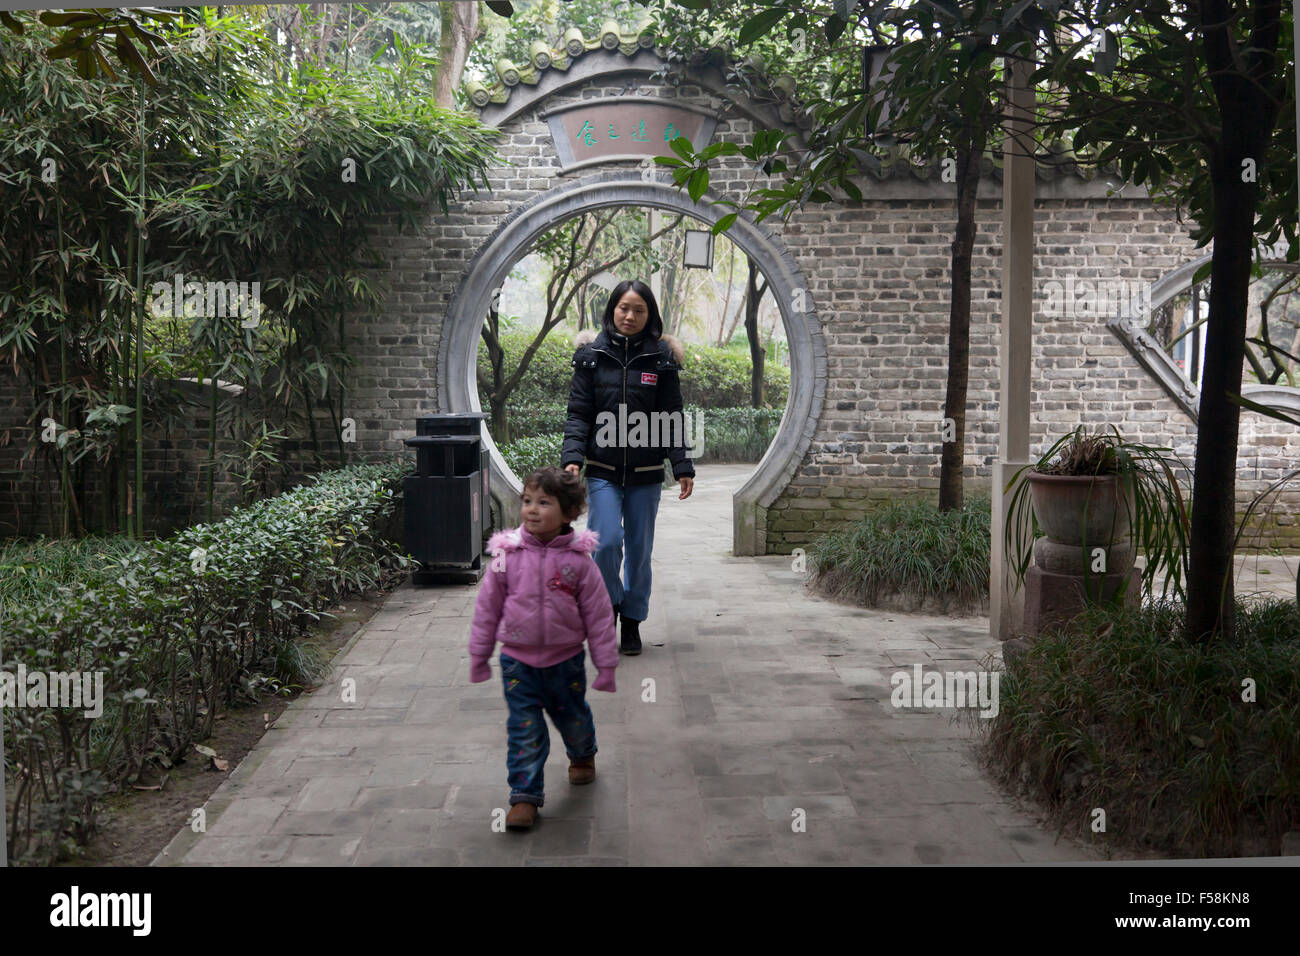 A mother follows her daughter in an old garden at an old town called Gucheng in Pixian at the outskirts of Chengdu in China. Stock Photo